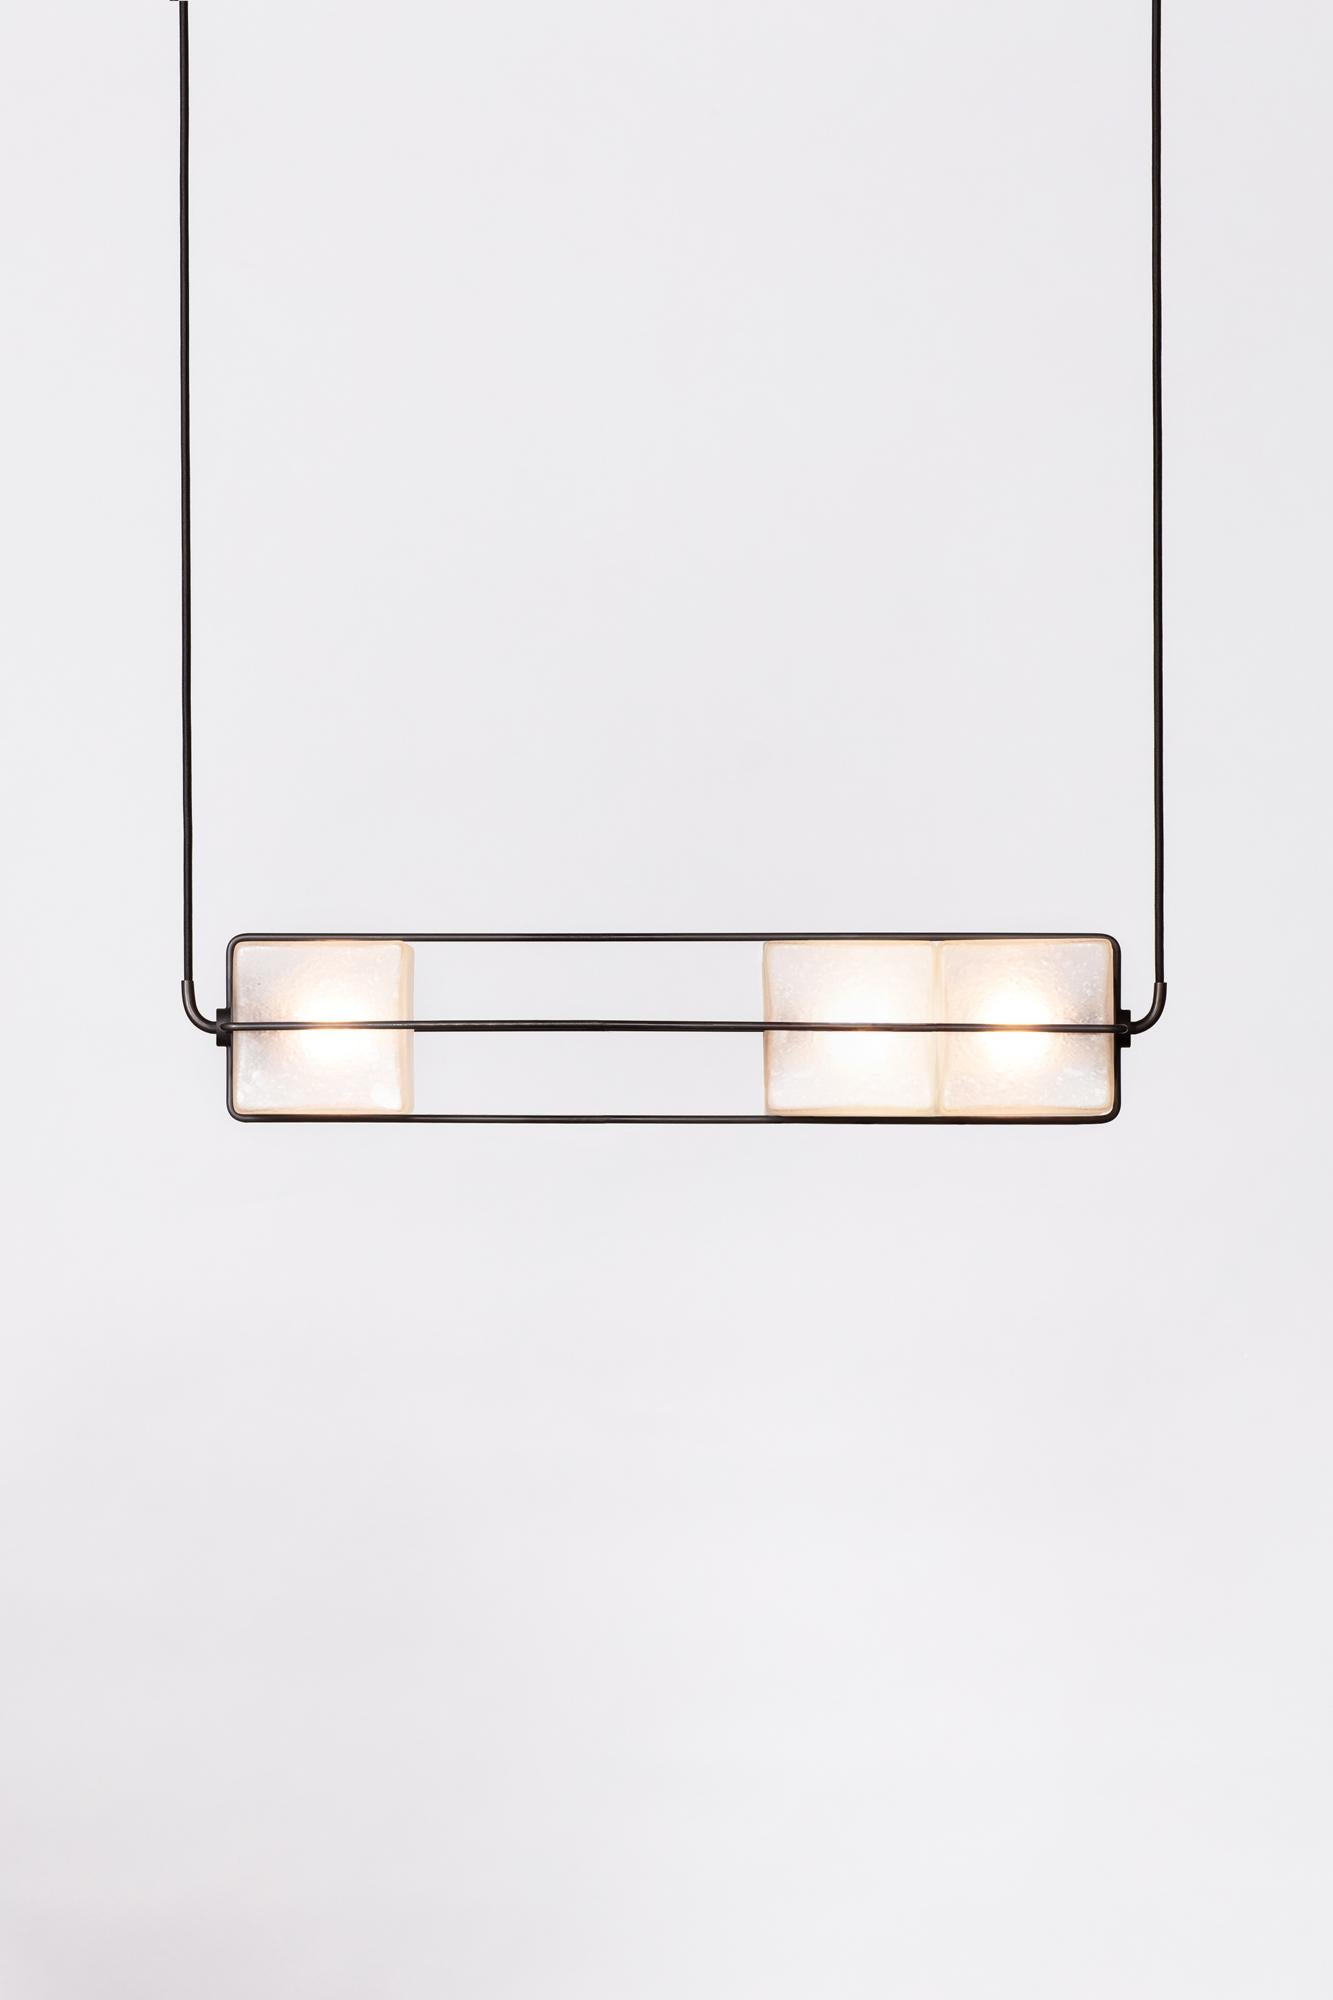 The Alice collection is inspired by brutalist modular architecture. The textured hand blown glass cubes are sandblasted to create a soft glow and stacked together to diffuse light in different intensities. The frame is made of solid brass, finished